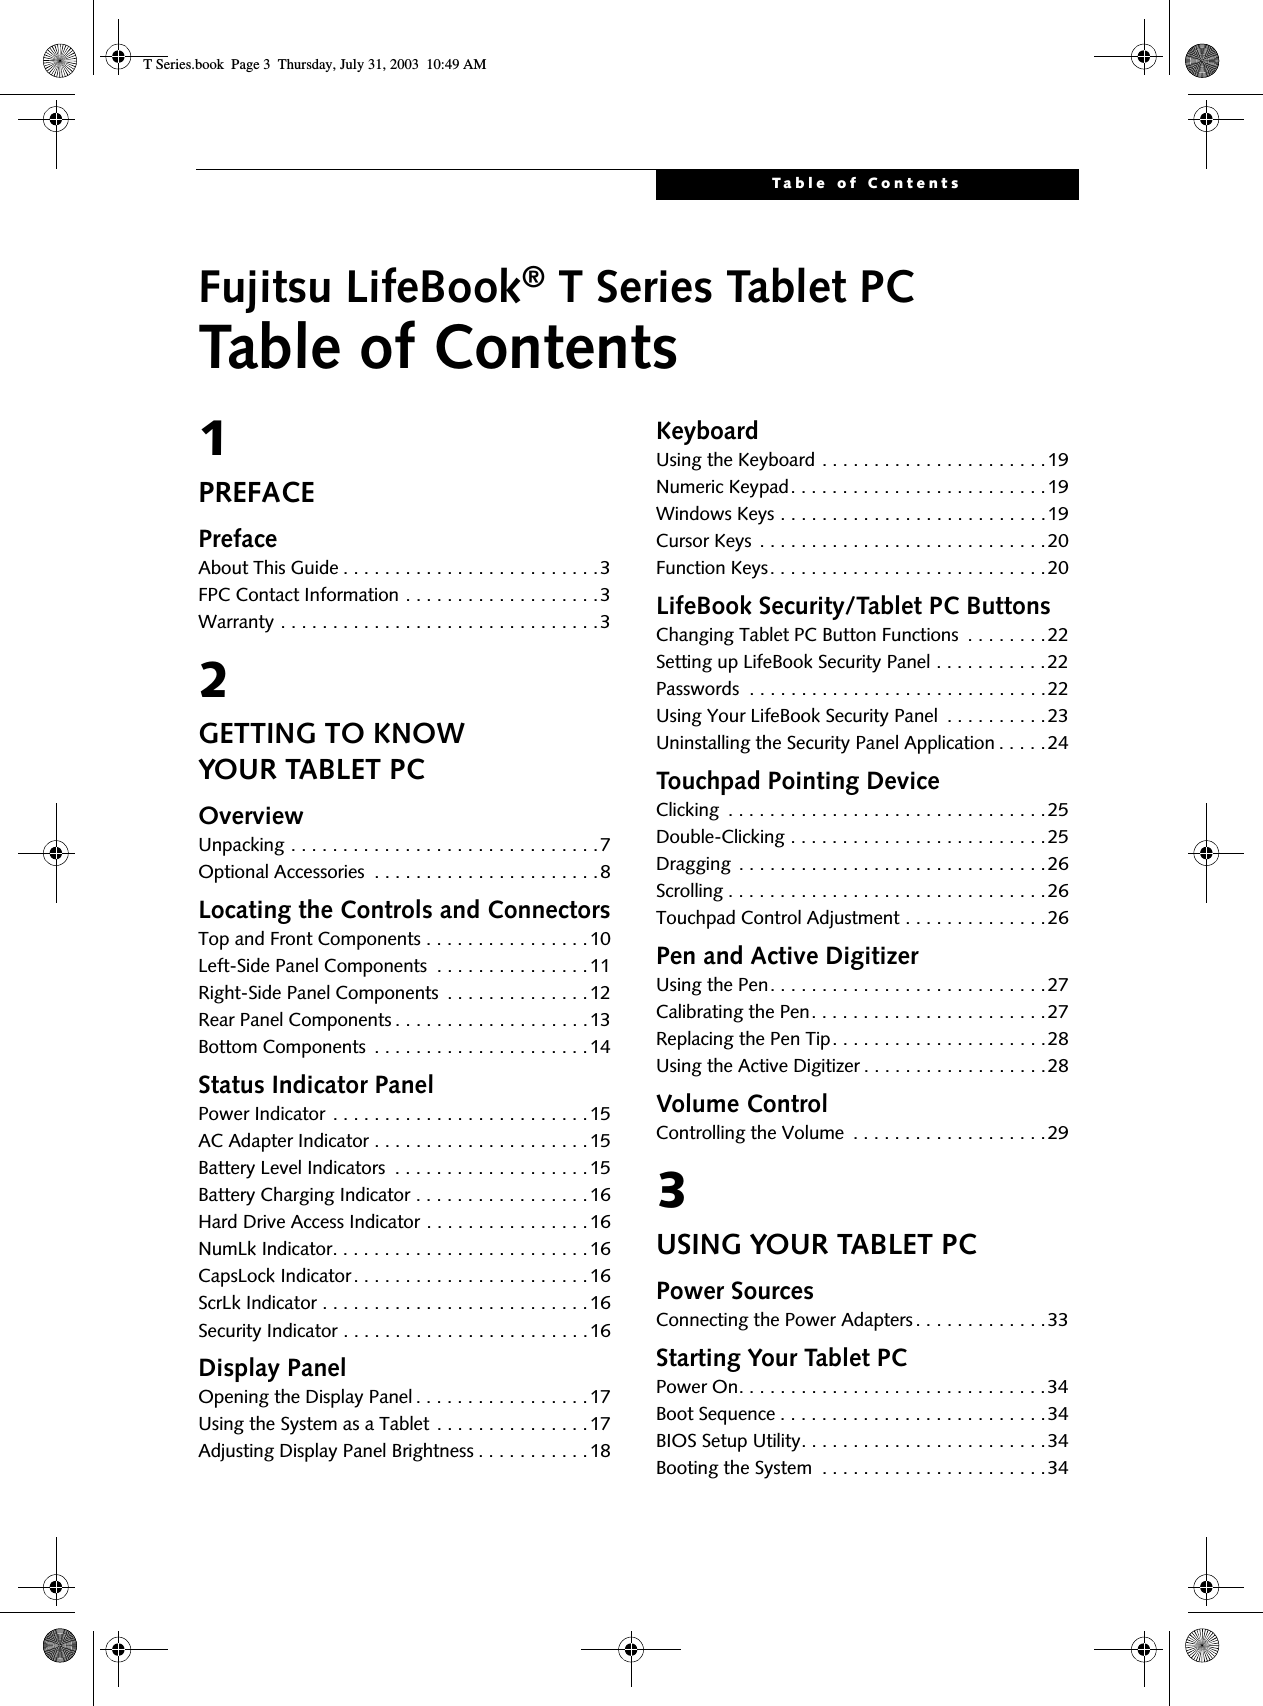 Table of ContentsFujitsu LifeBook® T Series Tablet PCTable of Contents1PREFACEPrefaceAbout This Guide . . . . . . . . . . . . . . . . . . . . . . . . .3FPC Contact Information . . . . . . . . . . . . . . . . . . .3Warranty . . . . . . . . . . . . . . . . . . . . . . . . . . . . . . .32GETTING TO KNOWYOUR TABLET PCOverviewUnpacking . . . . . . . . . . . . . . . . . . . . . . . . . . . . . .7Optional Accessories  . . . . . . . . . . . . . . . . . . . . . .8Locating the Controls and ConnectorsTop and Front Components . . . . . . . . . . . . . . . .10Left-Side Panel Components  . . . . . . . . . . . . . . .11Right-Side Panel Components  . . . . . . . . . . . . . .12Rear Panel Components . . . . . . . . . . . . . . . . . . .13Bottom Components  . . . . . . . . . . . . . . . . . . . . .14Status Indicator PanelPower Indicator . . . . . . . . . . . . . . . . . . . . . . . . .15AC Adapter Indicator . . . . . . . . . . . . . . . . . . . . .15Battery Level Indicators  . . . . . . . . . . . . . . . . . . .15Battery Charging Indicator . . . . . . . . . . . . . . . . .16Hard Drive Access Indicator . . . . . . . . . . . . . . . .16NumLk Indicator. . . . . . . . . . . . . . . . . . . . . . . . .16CapsLock Indicator. . . . . . . . . . . . . . . . . . . . . . .16ScrLk Indicator . . . . . . . . . . . . . . . . . . . . . . . . . .16Security Indicator . . . . . . . . . . . . . . . . . . . . . . . .16Display PanelOpening the Display Panel . . . . . . . . . . . . . . . . .17Using the System as a Tablet . . . . . . . . . . . . . . .17Adjusting Display Panel Brightness . . . . . . . . . . .18KeyboardUsing the Keyboard . . . . . . . . . . . . . . . . . . . . . .19Numeric Keypad. . . . . . . . . . . . . . . . . . . . . . . . .19Windows Keys . . . . . . . . . . . . . . . . . . . . . . . . . .19Cursor Keys  . . . . . . . . . . . . . . . . . . . . . . . . . . . .20Function Keys. . . . . . . . . . . . . . . . . . . . . . . . . . .20LifeBook Security/Tablet PC ButtonsChanging Tablet PC Button Functions  . . . . . . . .22Setting up LifeBook Security Panel . . . . . . . . . . .22Passwords  . . . . . . . . . . . . . . . . . . . . . . . . . . . . .22Using Your LifeBook Security Panel  . . . . . . . . . .23Uninstalling the Security Panel Application . . . . . 24Touchpad Pointing DeviceClicking  . . . . . . . . . . . . . . . . . . . . . . . . . . . . . . .25Double-Clicking . . . . . . . . . . . . . . . . . . . . . . . . .25Dragging . . . . . . . . . . . . . . . . . . . . . . . . . . . . . .26Scrolling . . . . . . . . . . . . . . . . . . . . . . . . . . . . . . .26Touchpad Control Adjustment . . . . . . . . . . . . . .26Pen and Active DigitizerUsing the Pen. . . . . . . . . . . . . . . . . . . . . . . . . . .27Calibrating the Pen. . . . . . . . . . . . . . . . . . . . . . .27Replacing the Pen Tip. . . . . . . . . . . . . . . . . . . . .28Using the Active Digitizer . . . . . . . . . . . . . . . . . .28Volume ControlControlling the Volume  . . . . . . . . . . . . . . . . . . .293USING YOUR TABLET PCPower SourcesConnecting the Power Adapters . . . . . . . . . . . . .33Starting Your Tablet PCPower On. . . . . . . . . . . . . . . . . . . . . . . . . . . . . .34Boot Sequence . . . . . . . . . . . . . . . . . . . . . . . . . .34BIOS Setup Utility. . . . . . . . . . . . . . . . . . . . . . . .34Booting the System  . . . . . . . . . . . . . . . . . . . . . .34T Series.book  Page 3  Thursday, July 31, 2003  10:49 AM